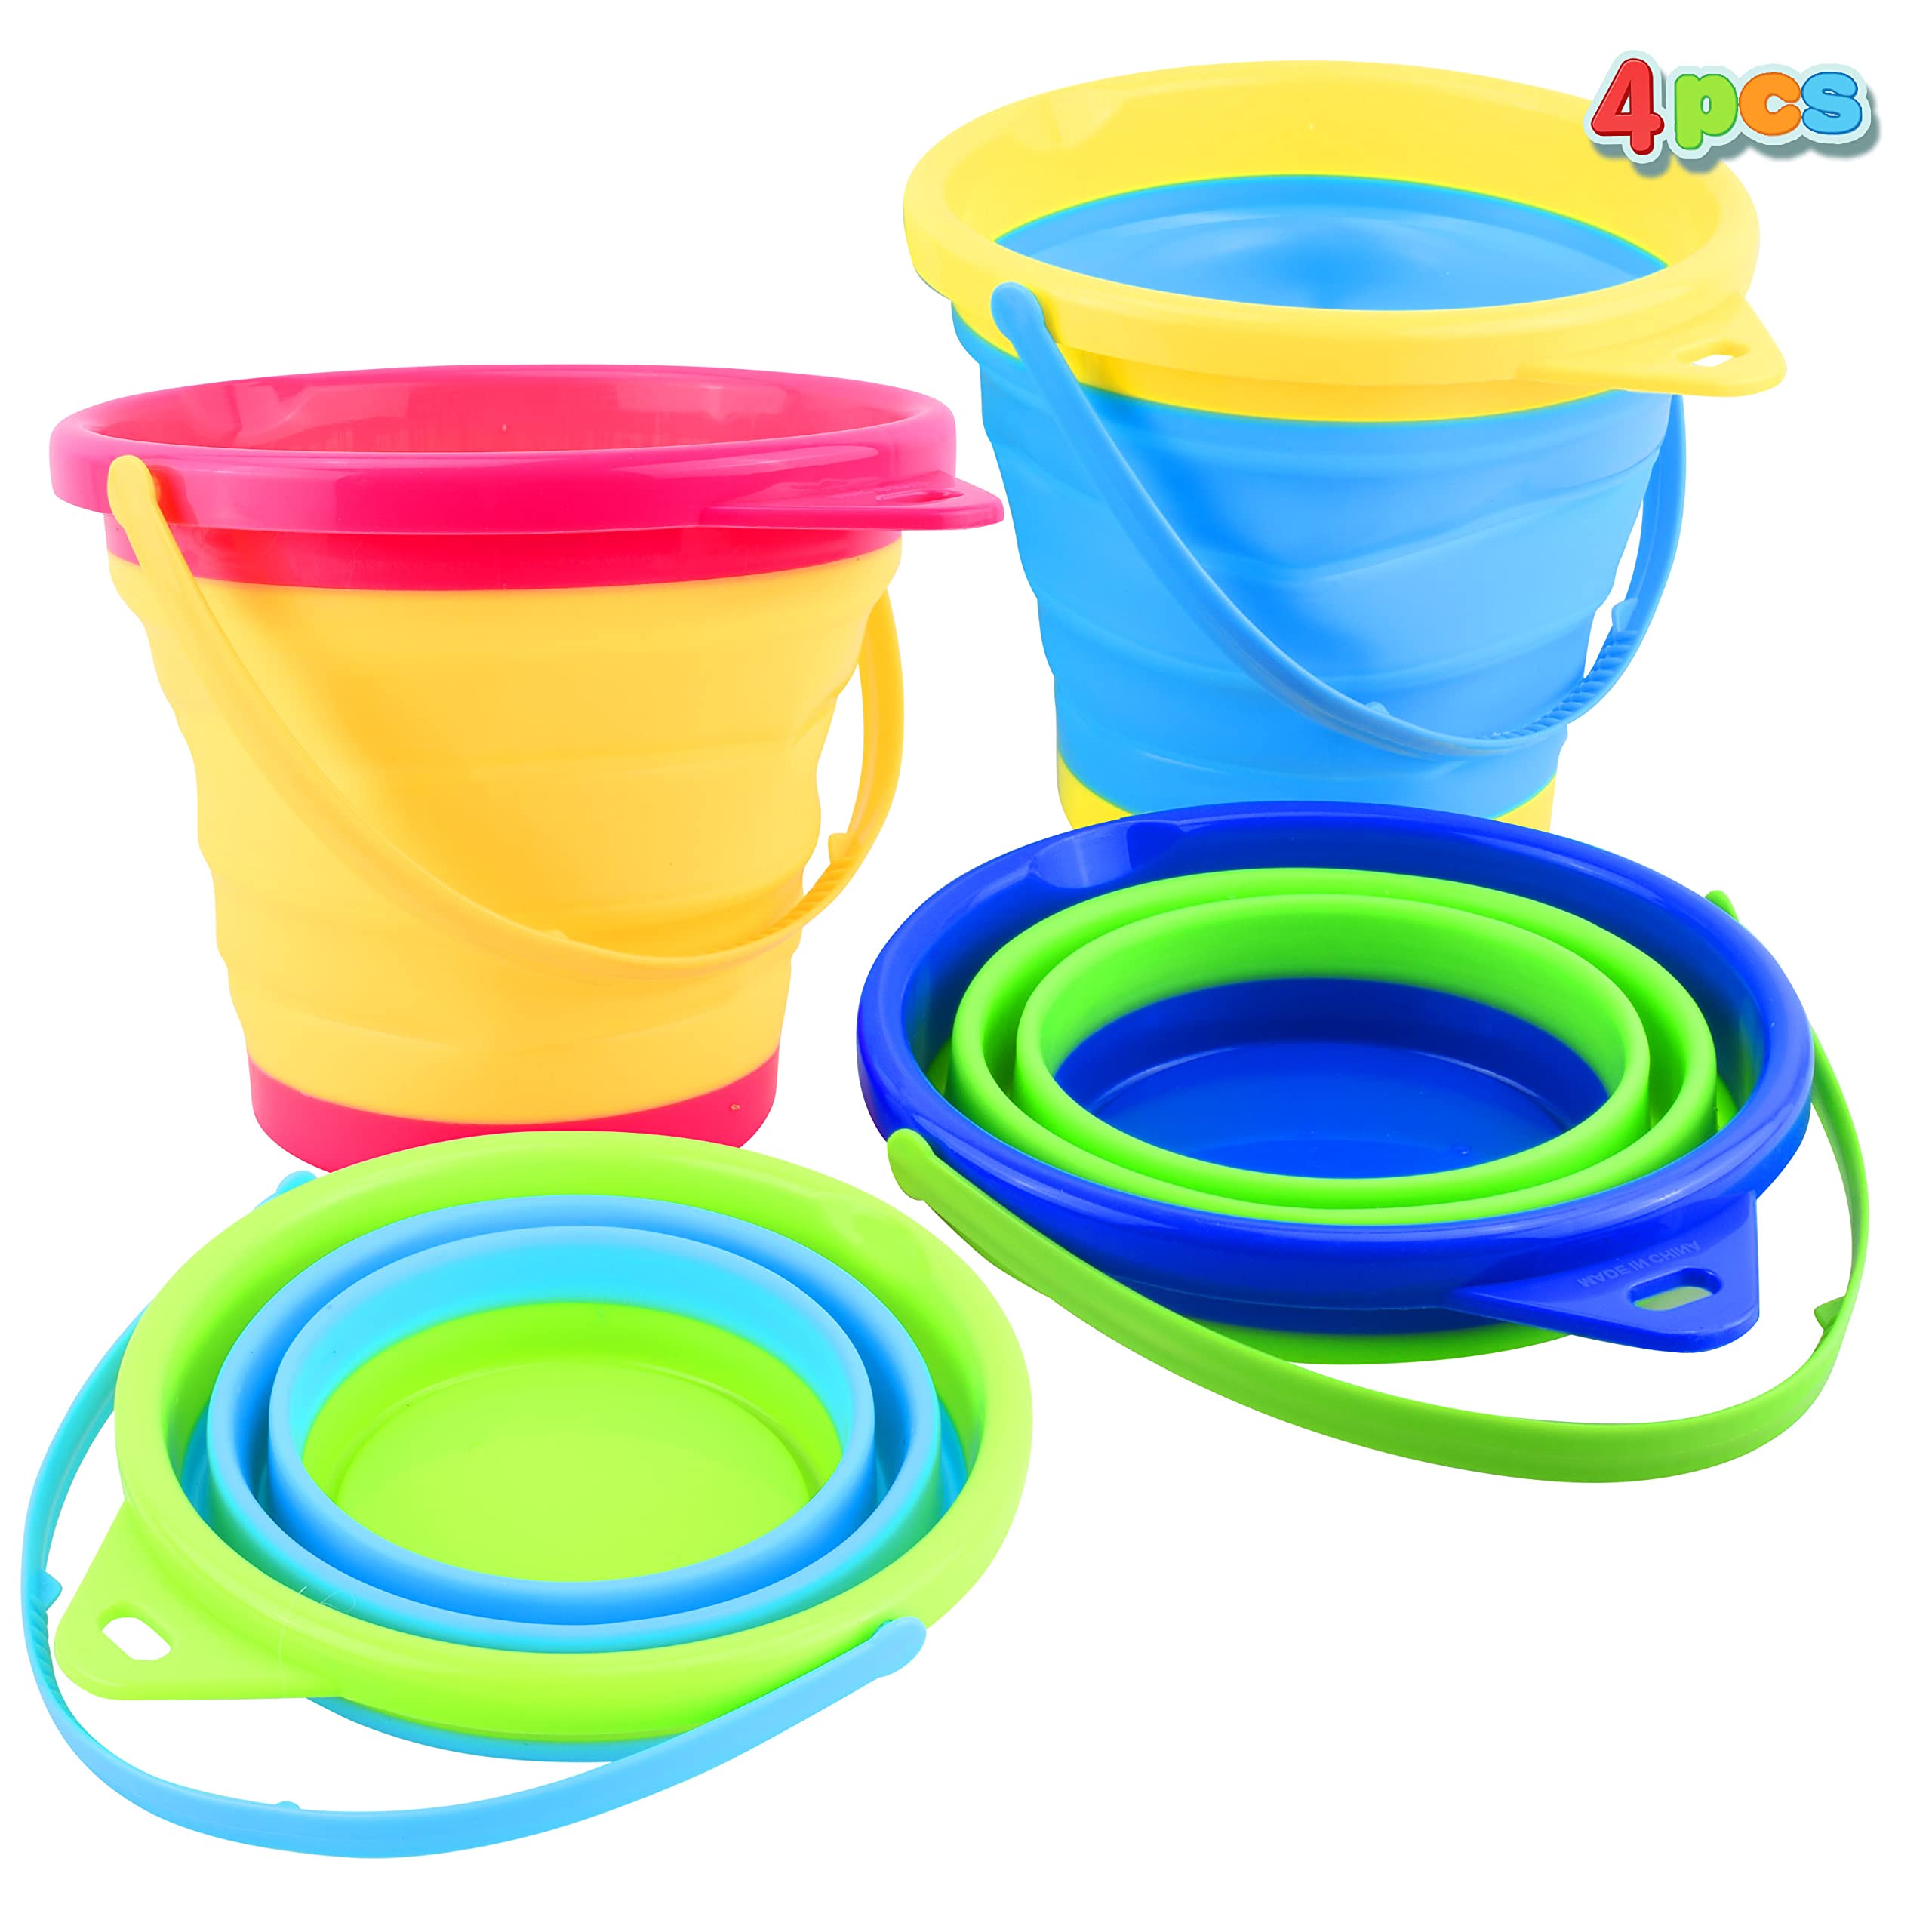 JOYIN 4 Collapsible Buckets & Basket for Kid, 2L Foldable Round